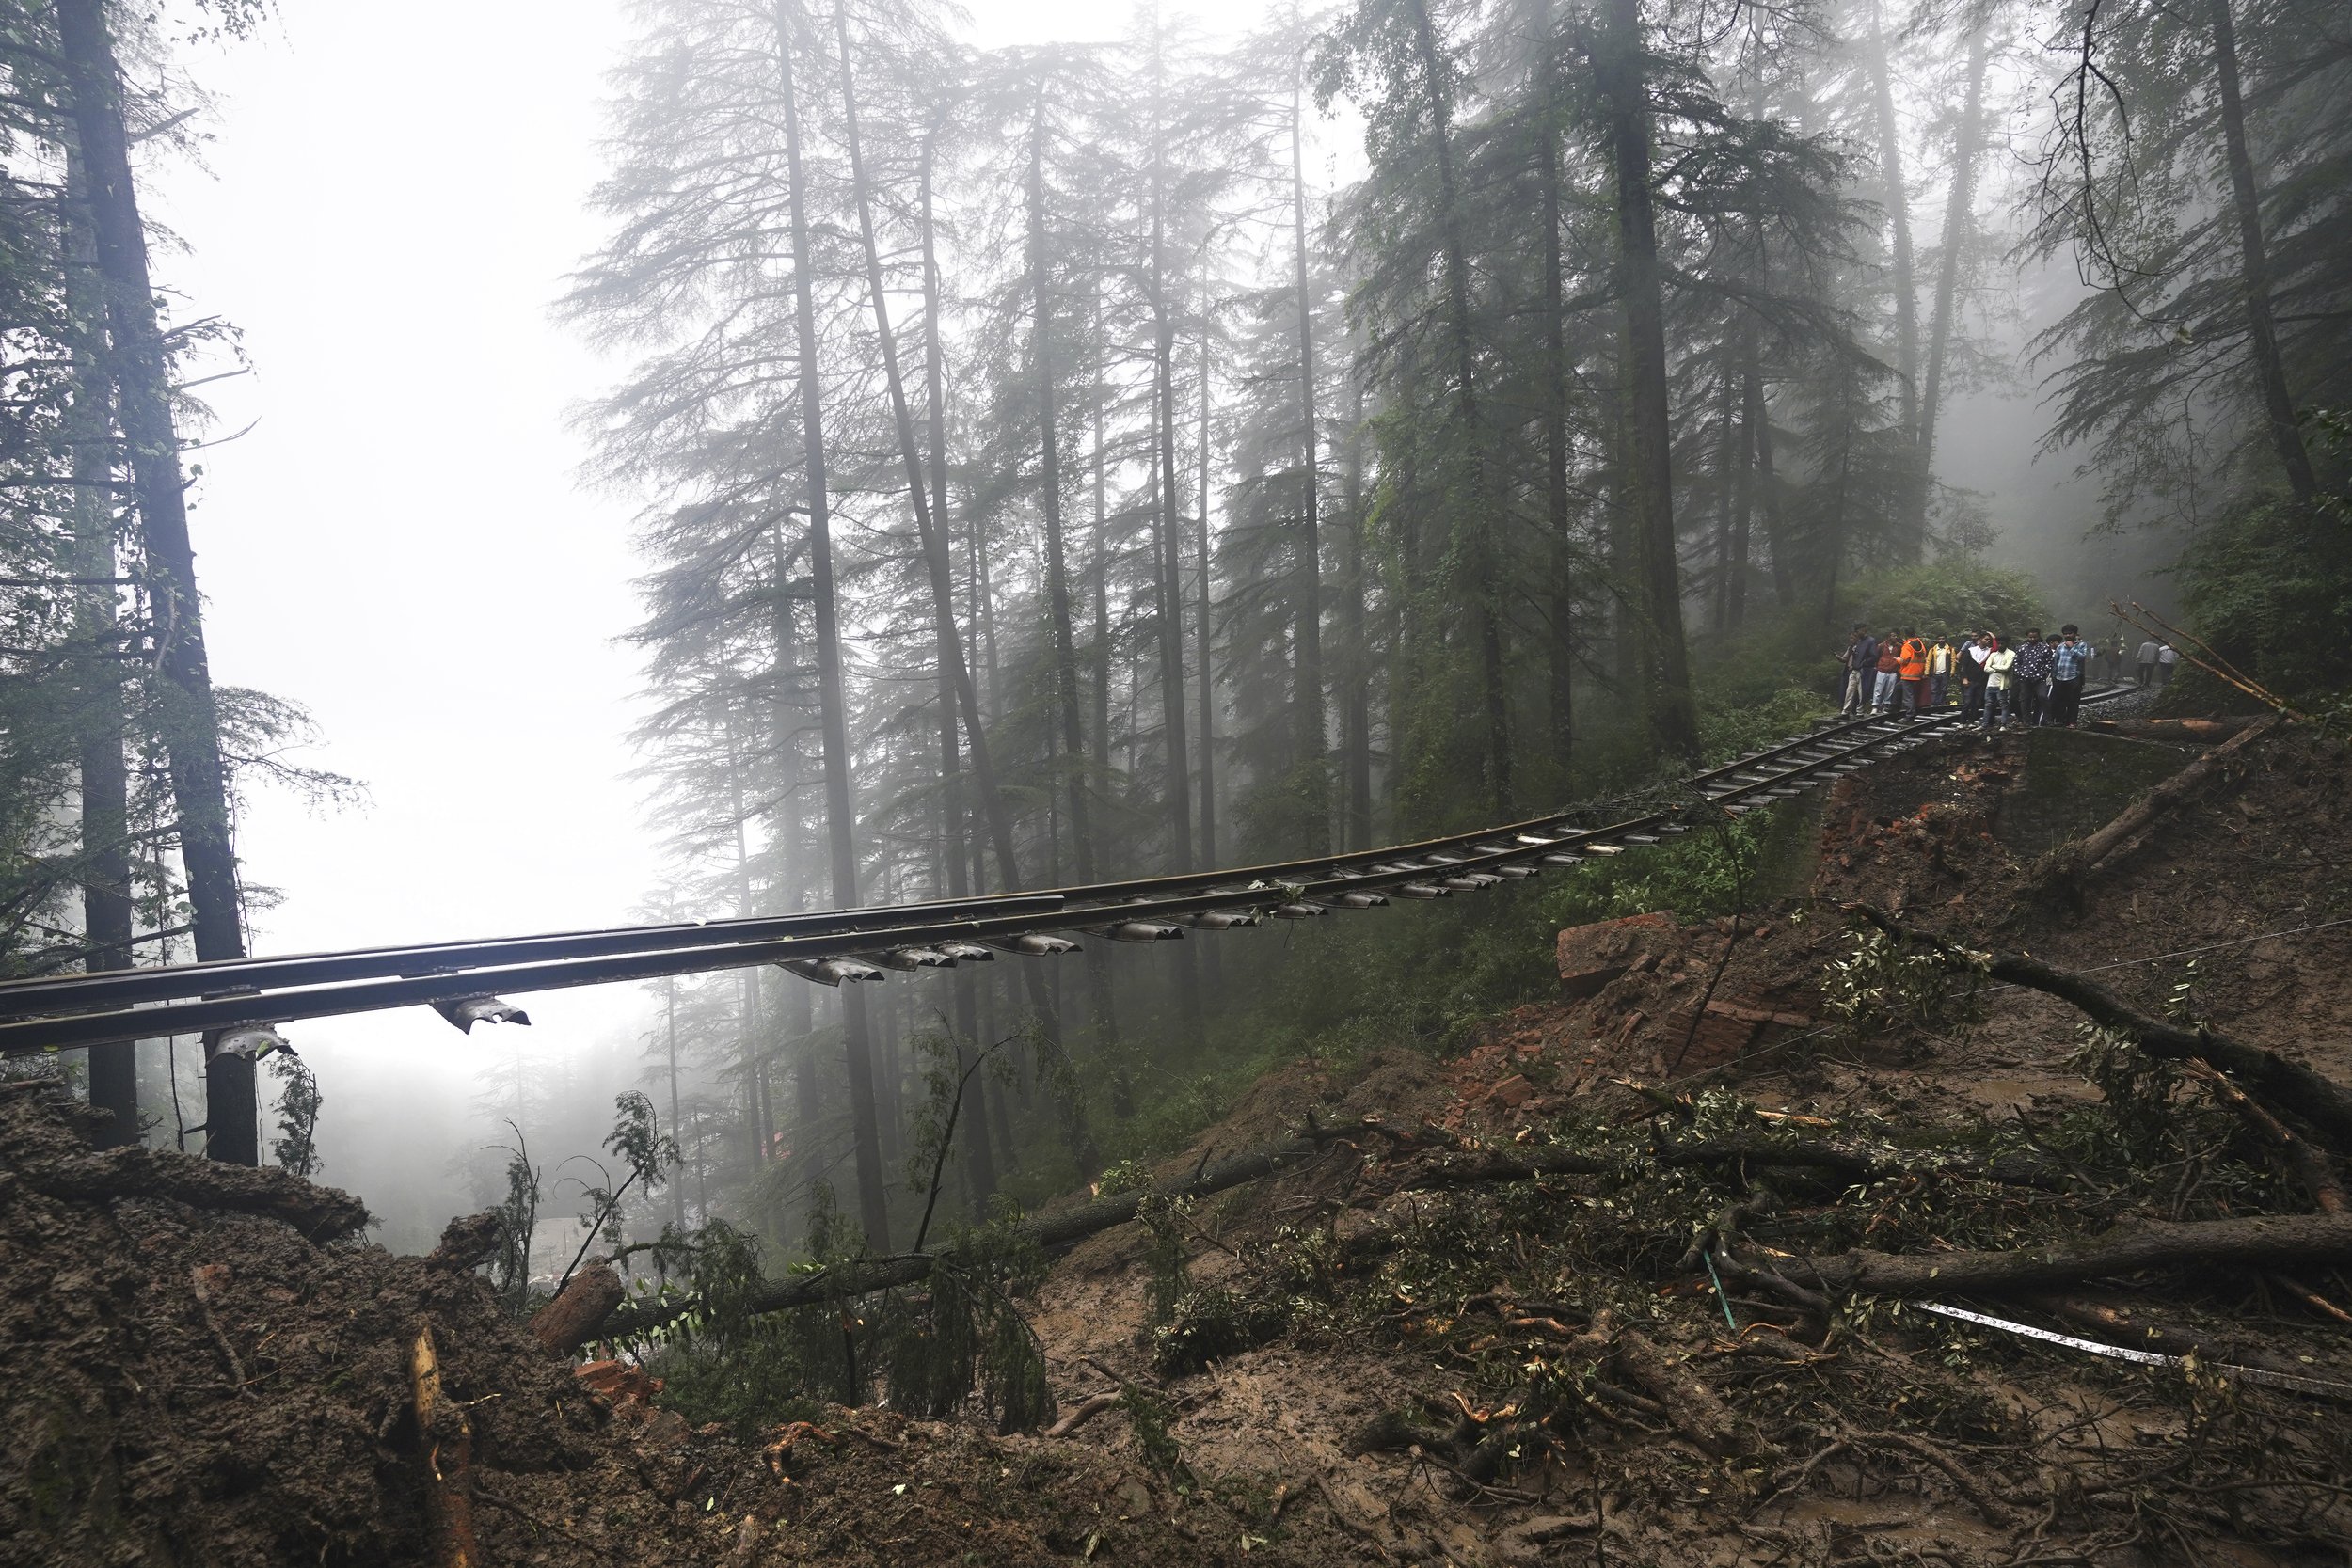  A portion of the Shimla-Kalka heritage railway track dangles above ground that was washed away following heavy rainfall on the outskirts of Shimla, Himachal Pradesh state, in India's Himalayan region on Aug. 14, 2023. (AP Photo/ Pradeep Kumar) 